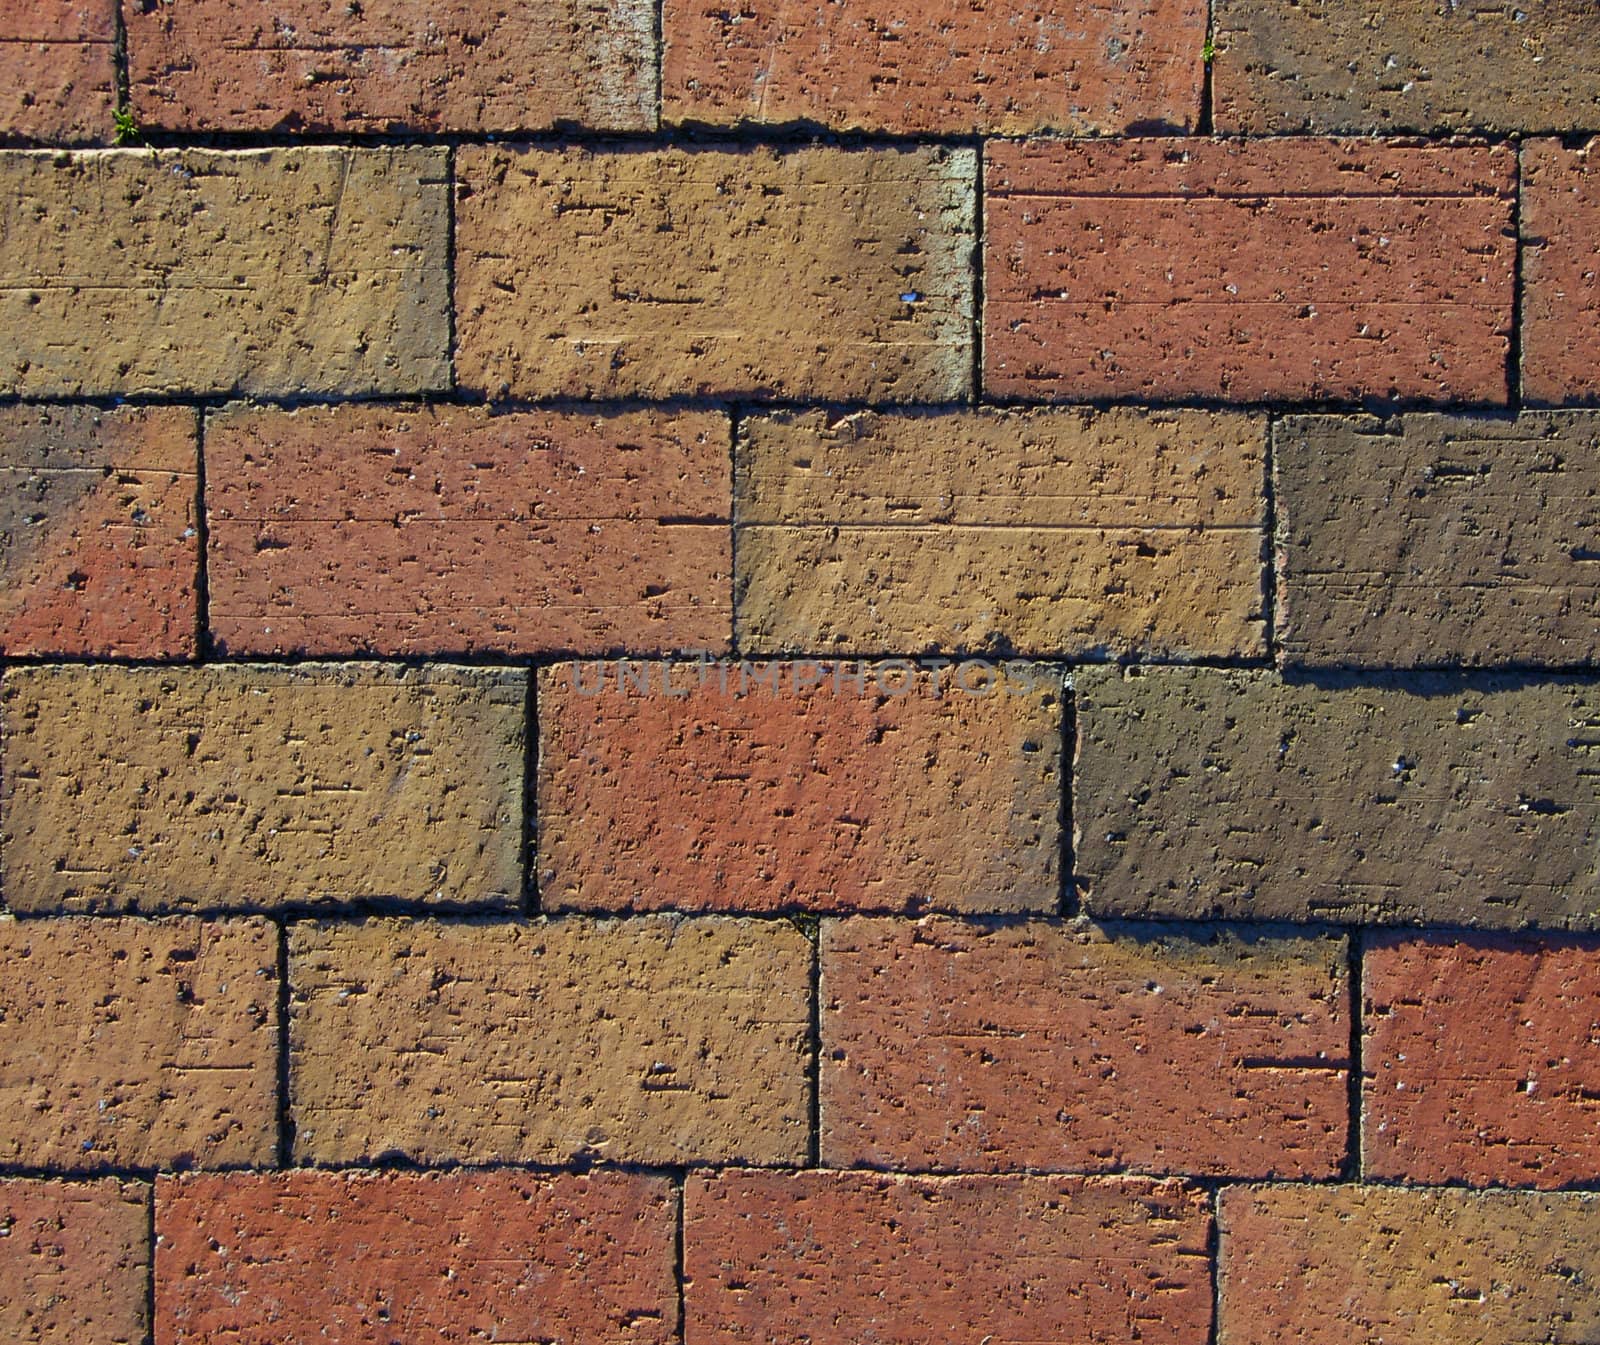 Brick Background 1 by npologuy